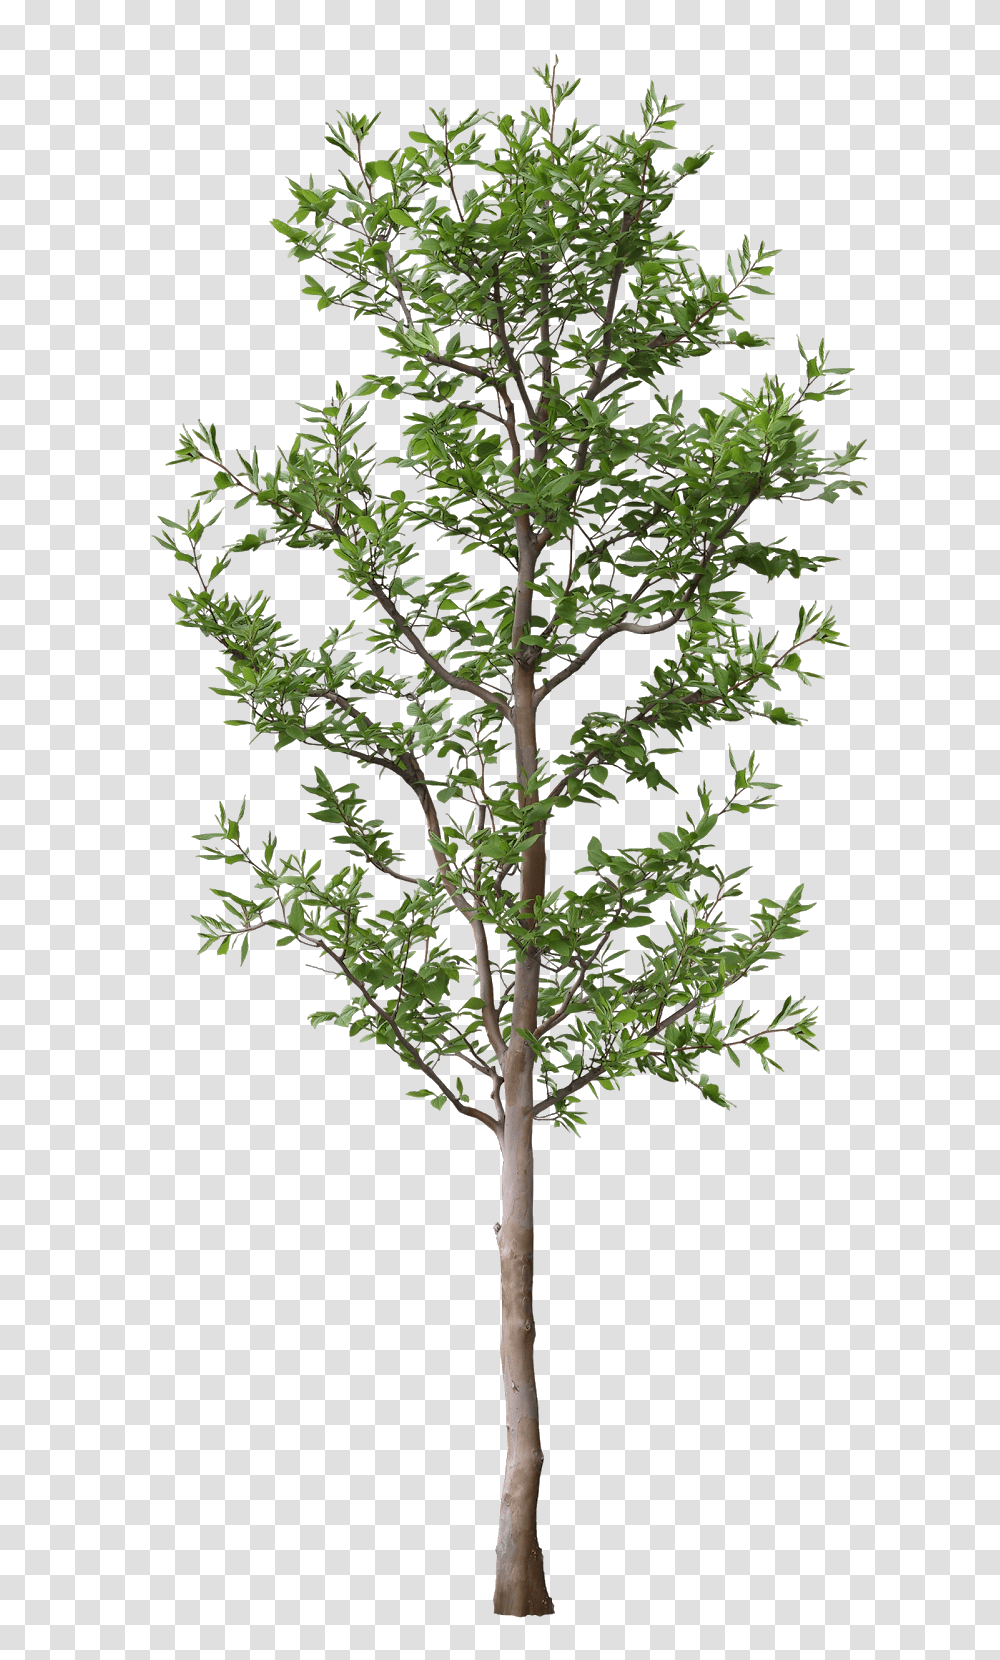 Arbol Tree For Architectural Rendering, Plant, Cross, Symbol, Tree Trunk Transparent Png